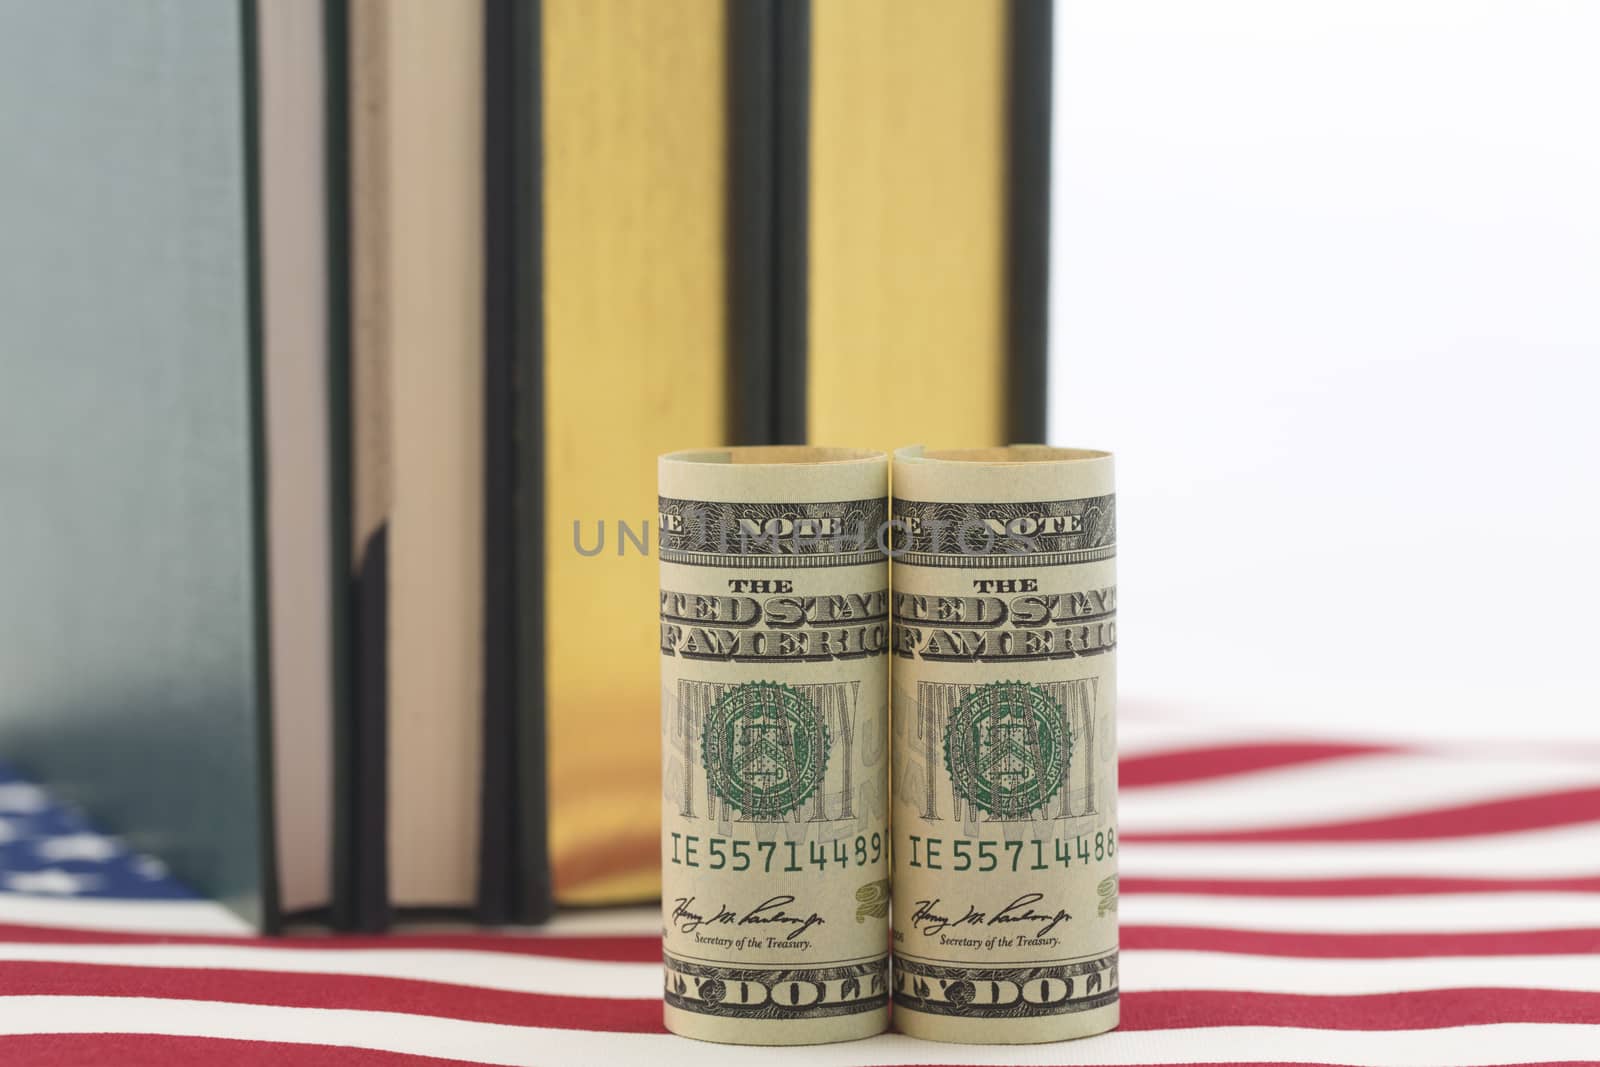 Pair of American dollars in front of upright books on an American stars and stripes flag pattern.  National policy on costs of education needed. 